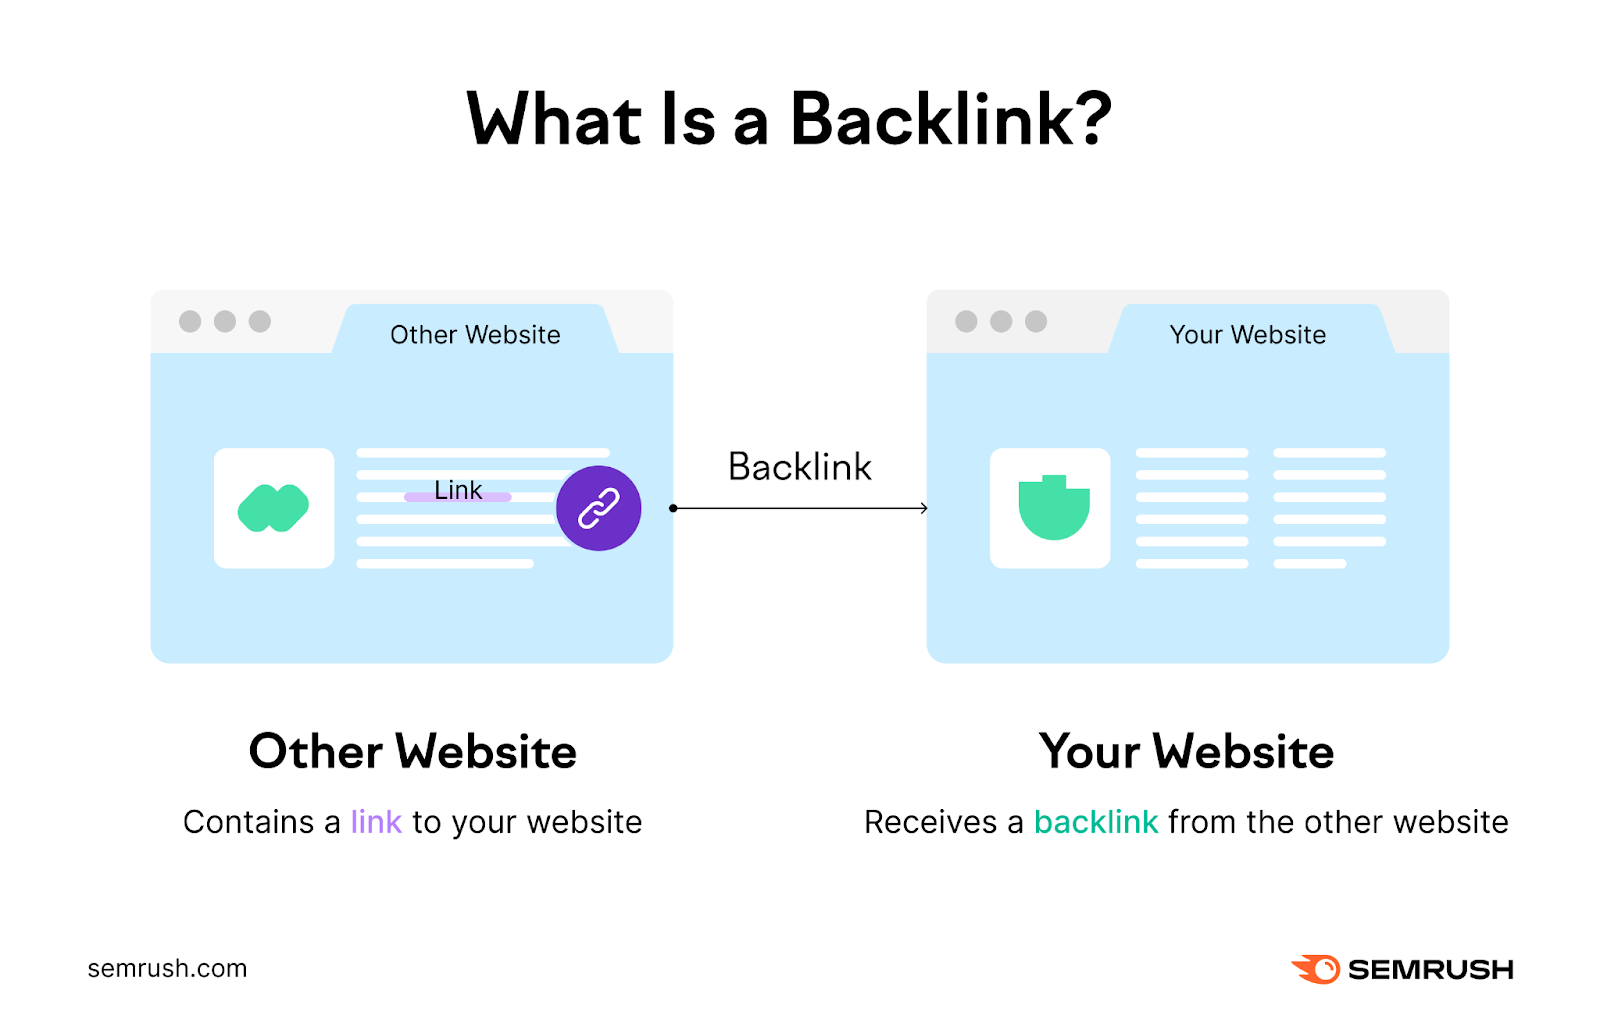 A website receives a backlink from another website